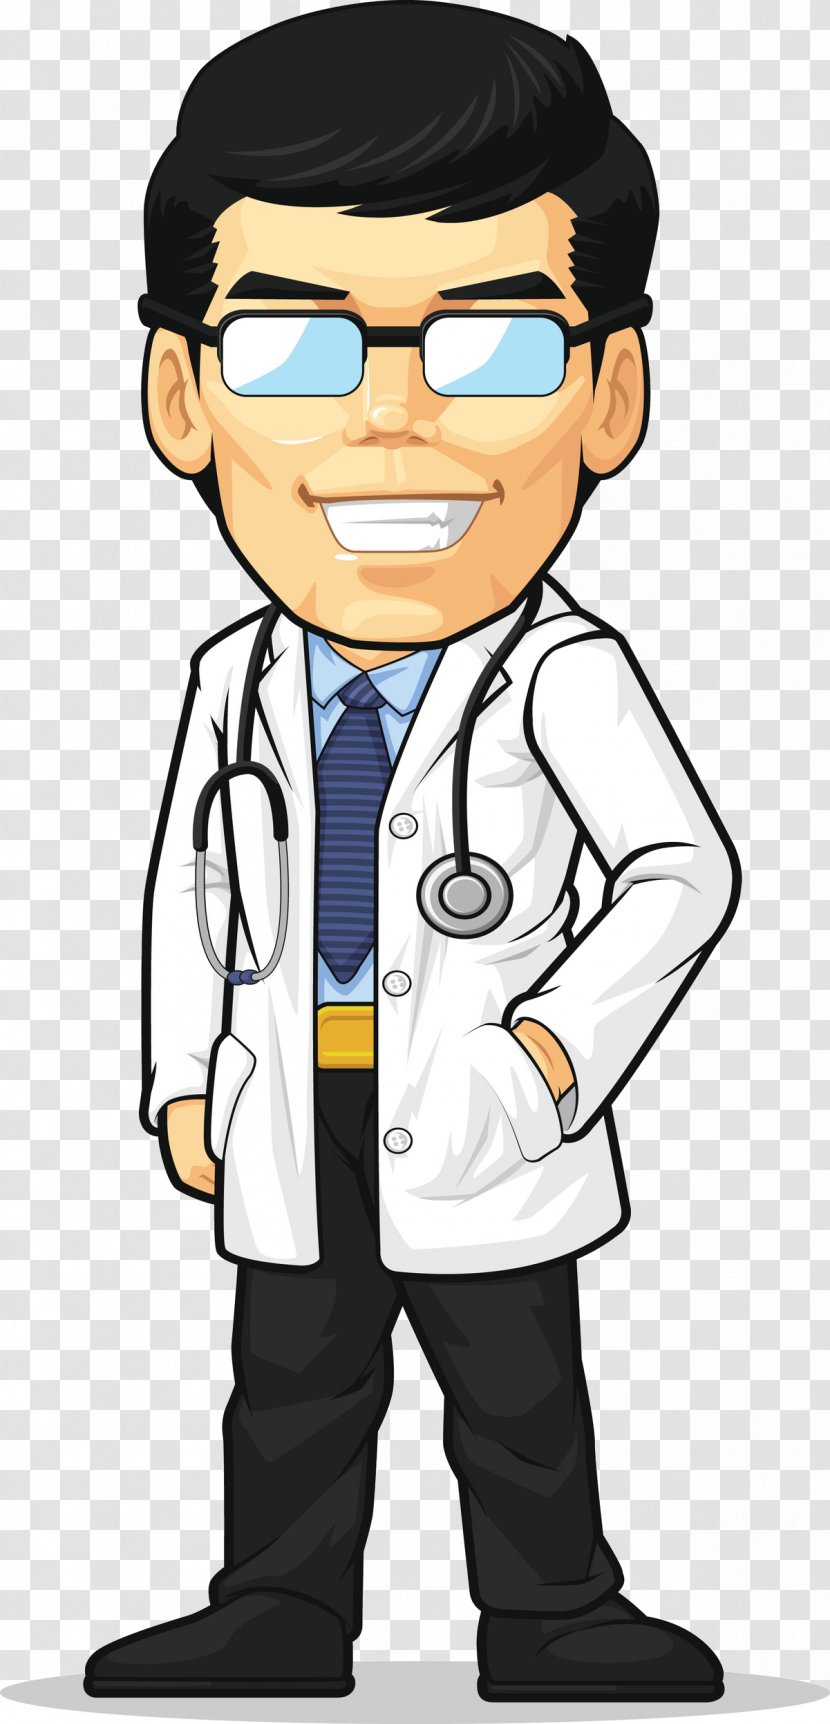 Cartoon Physician Drawing Royalty-free - Doctor Transparent PNG